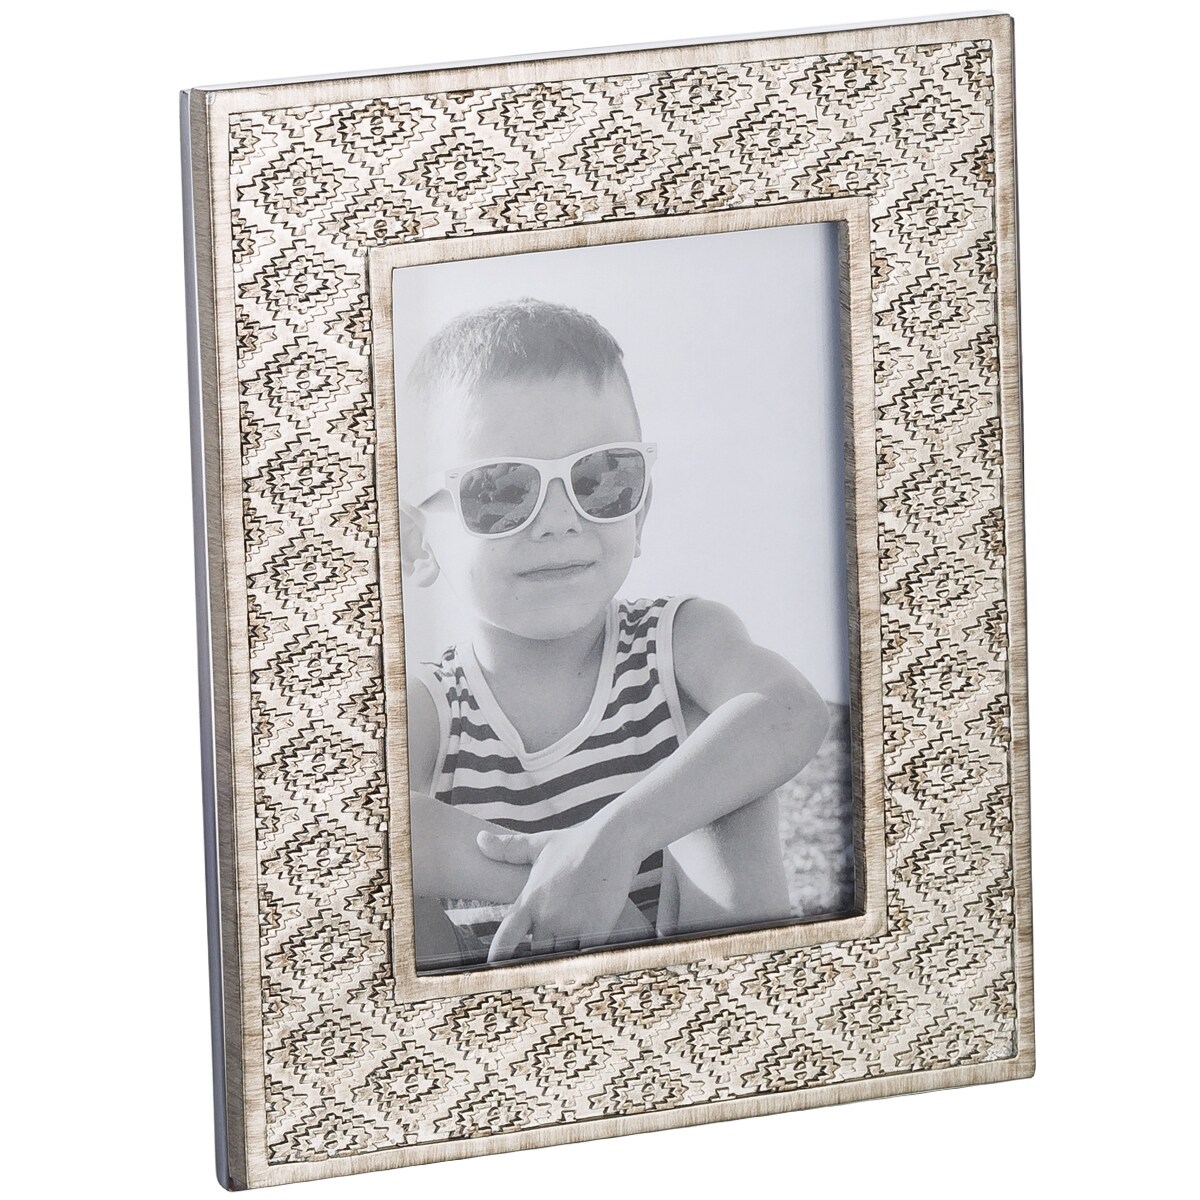 https://ak1.ostkcdn.com/images/products/is/images/direct/ca8965b203da4d2c8e21c50af1456ad253301b12/Dublin-5x7-Picture-Frame-%28Brushed-Silver%29.jpg